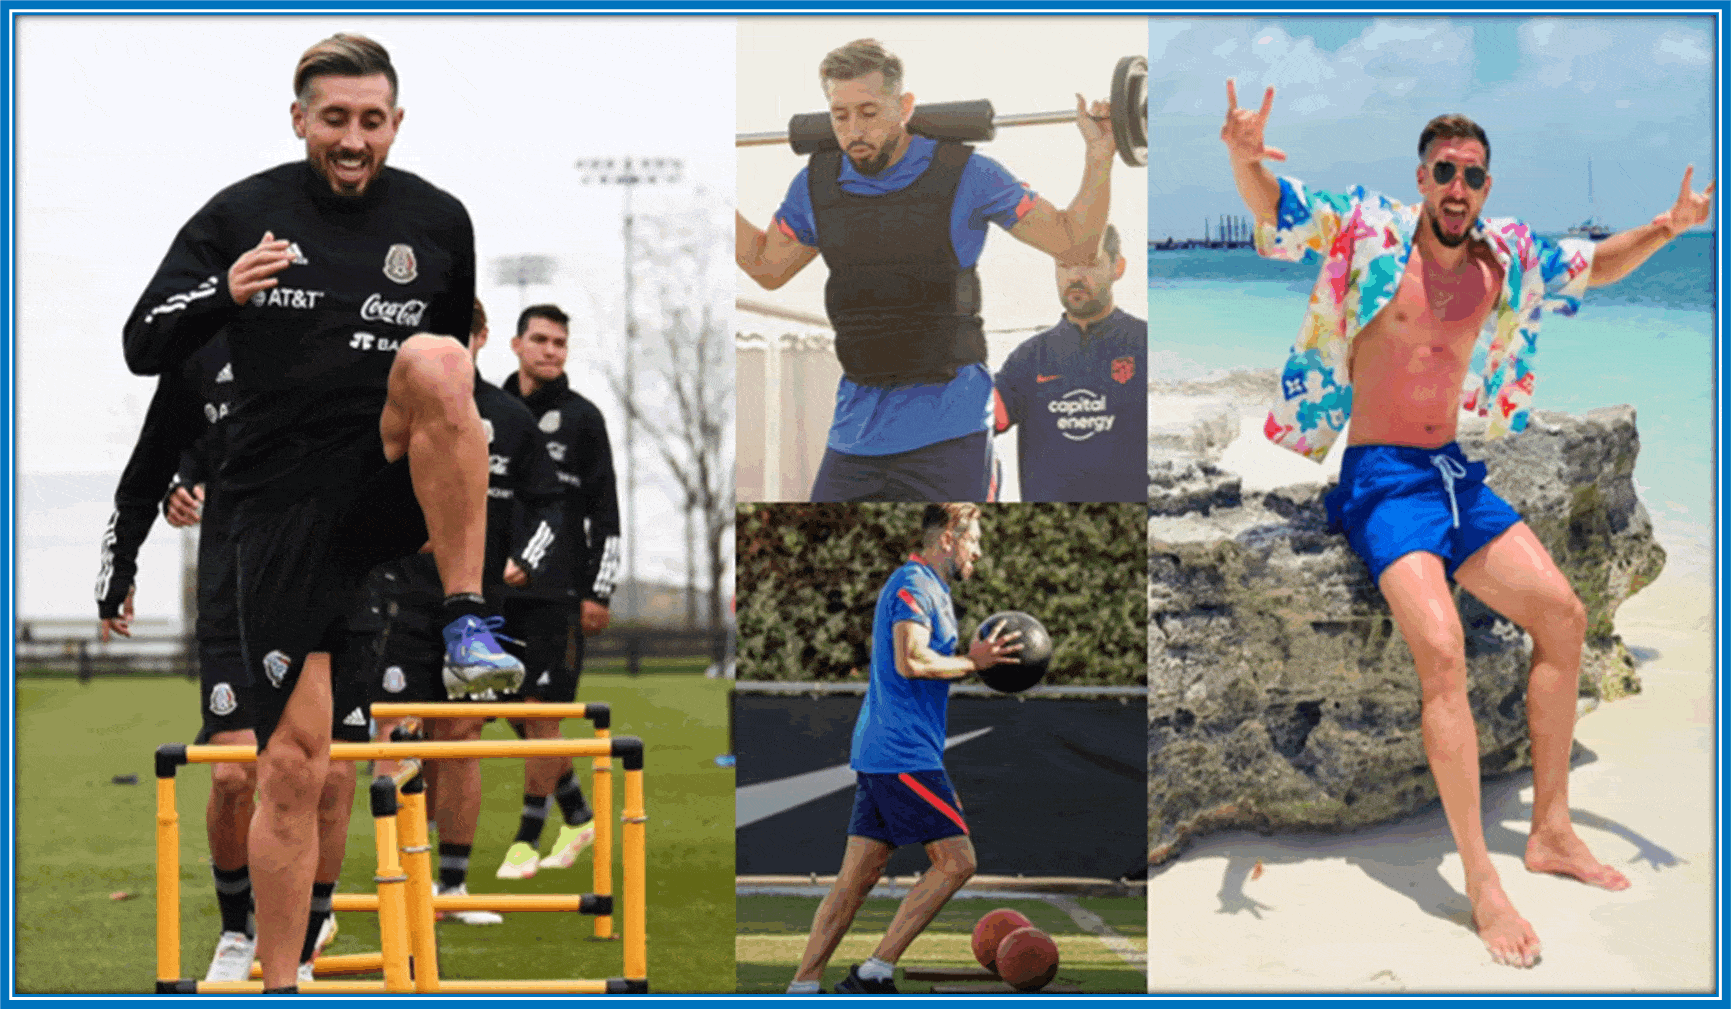 Héctor Herrera has a charming personality. His steady workout schedule has helped to keep him fit.